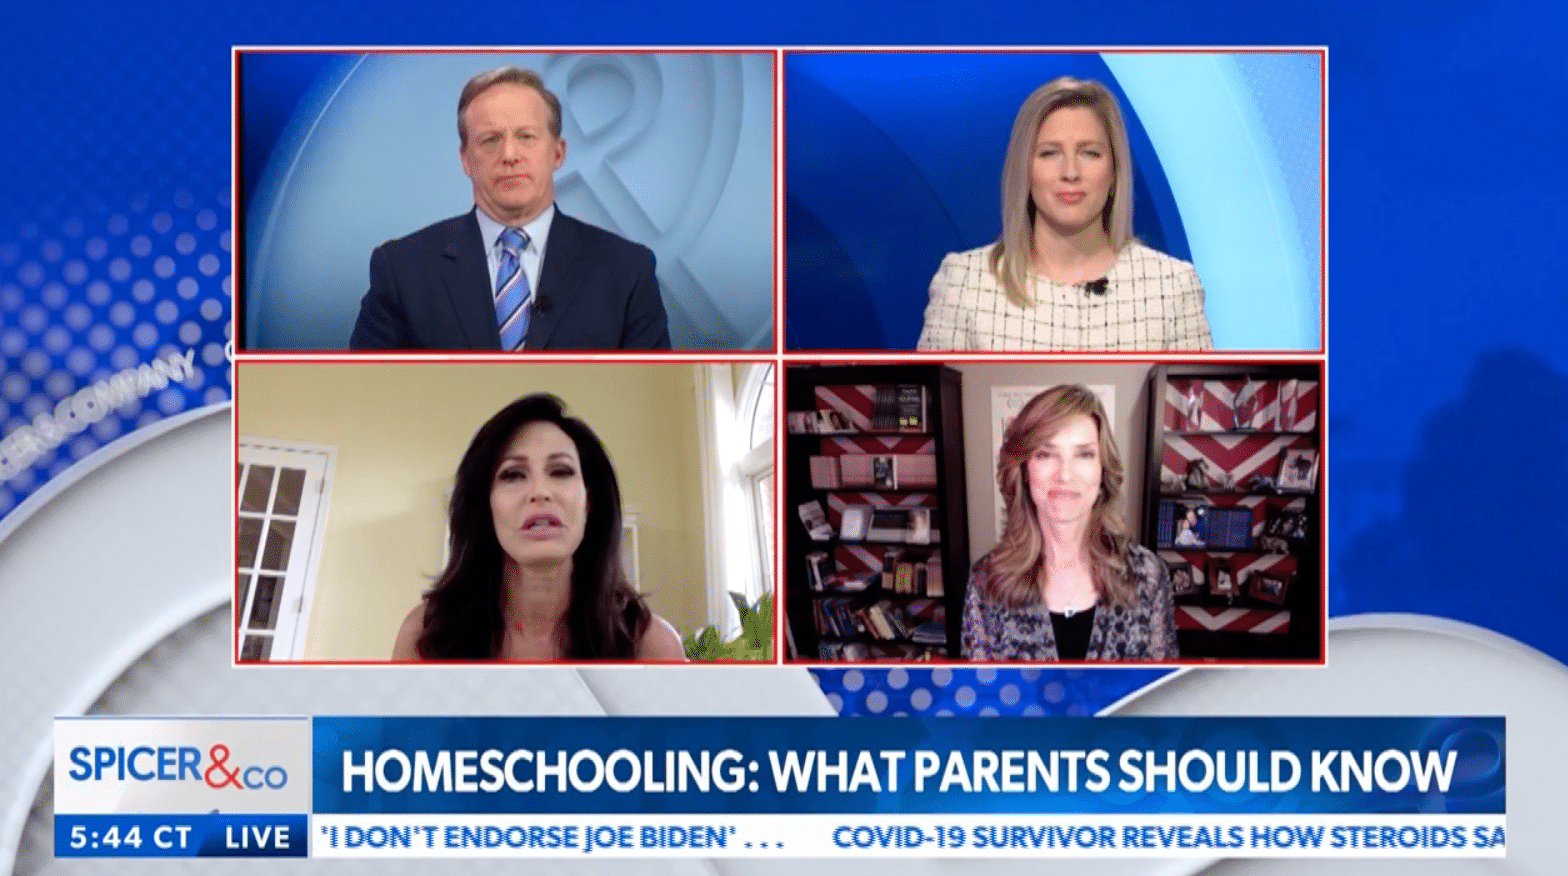 Penny Nance on Newsmax: Homeschooling During Covid-19